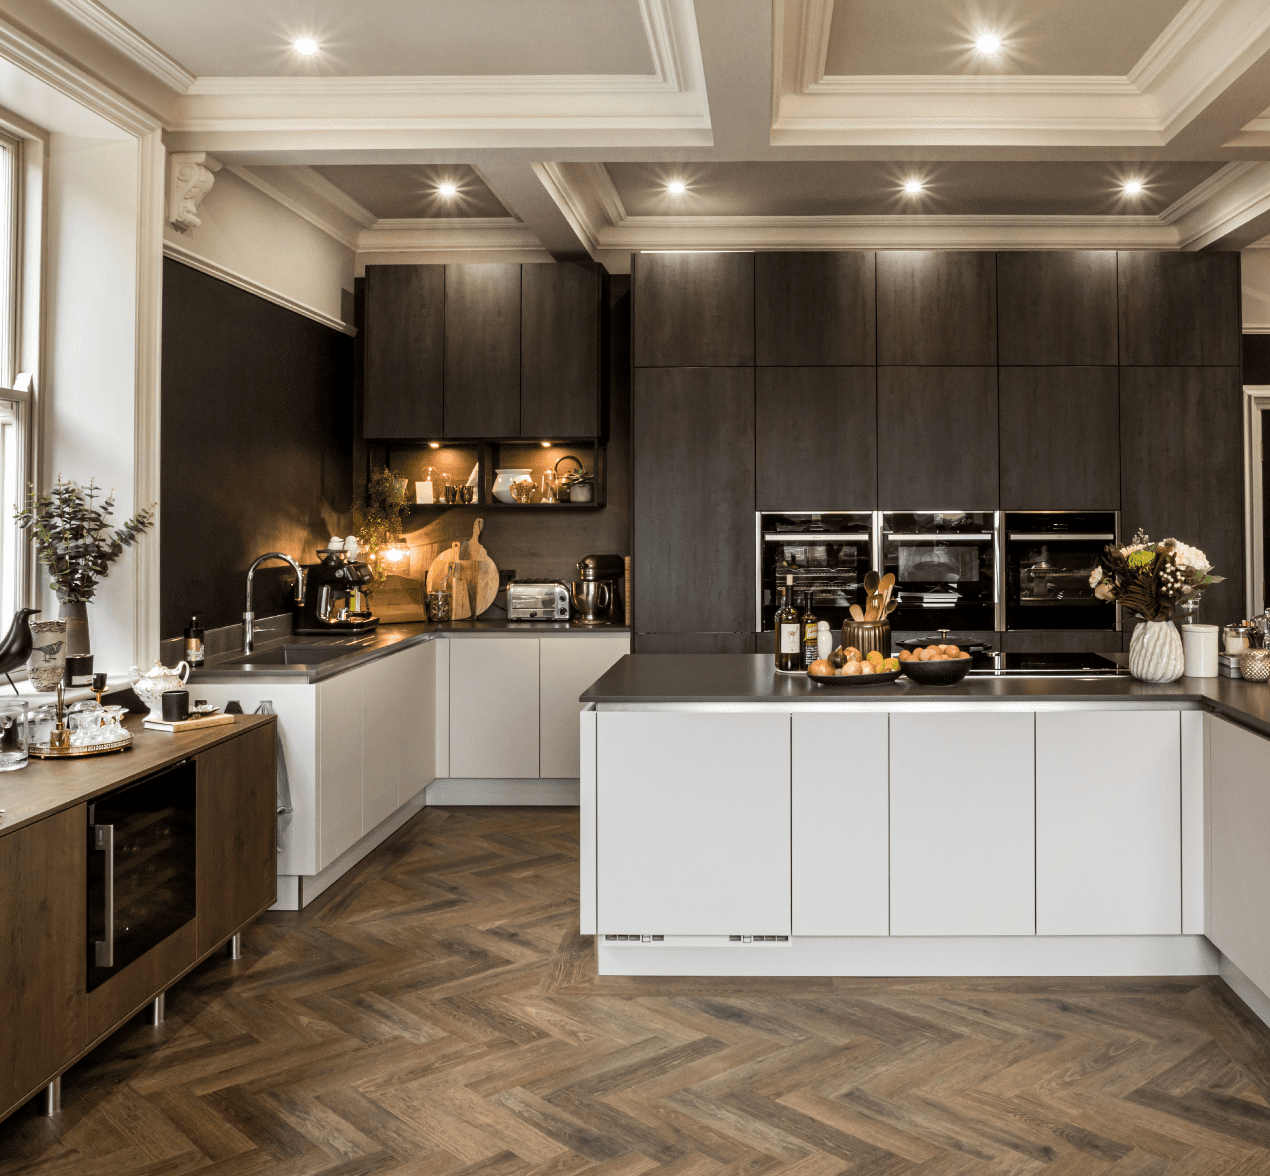 A second Kitchen Design Centre kitchen for a period property